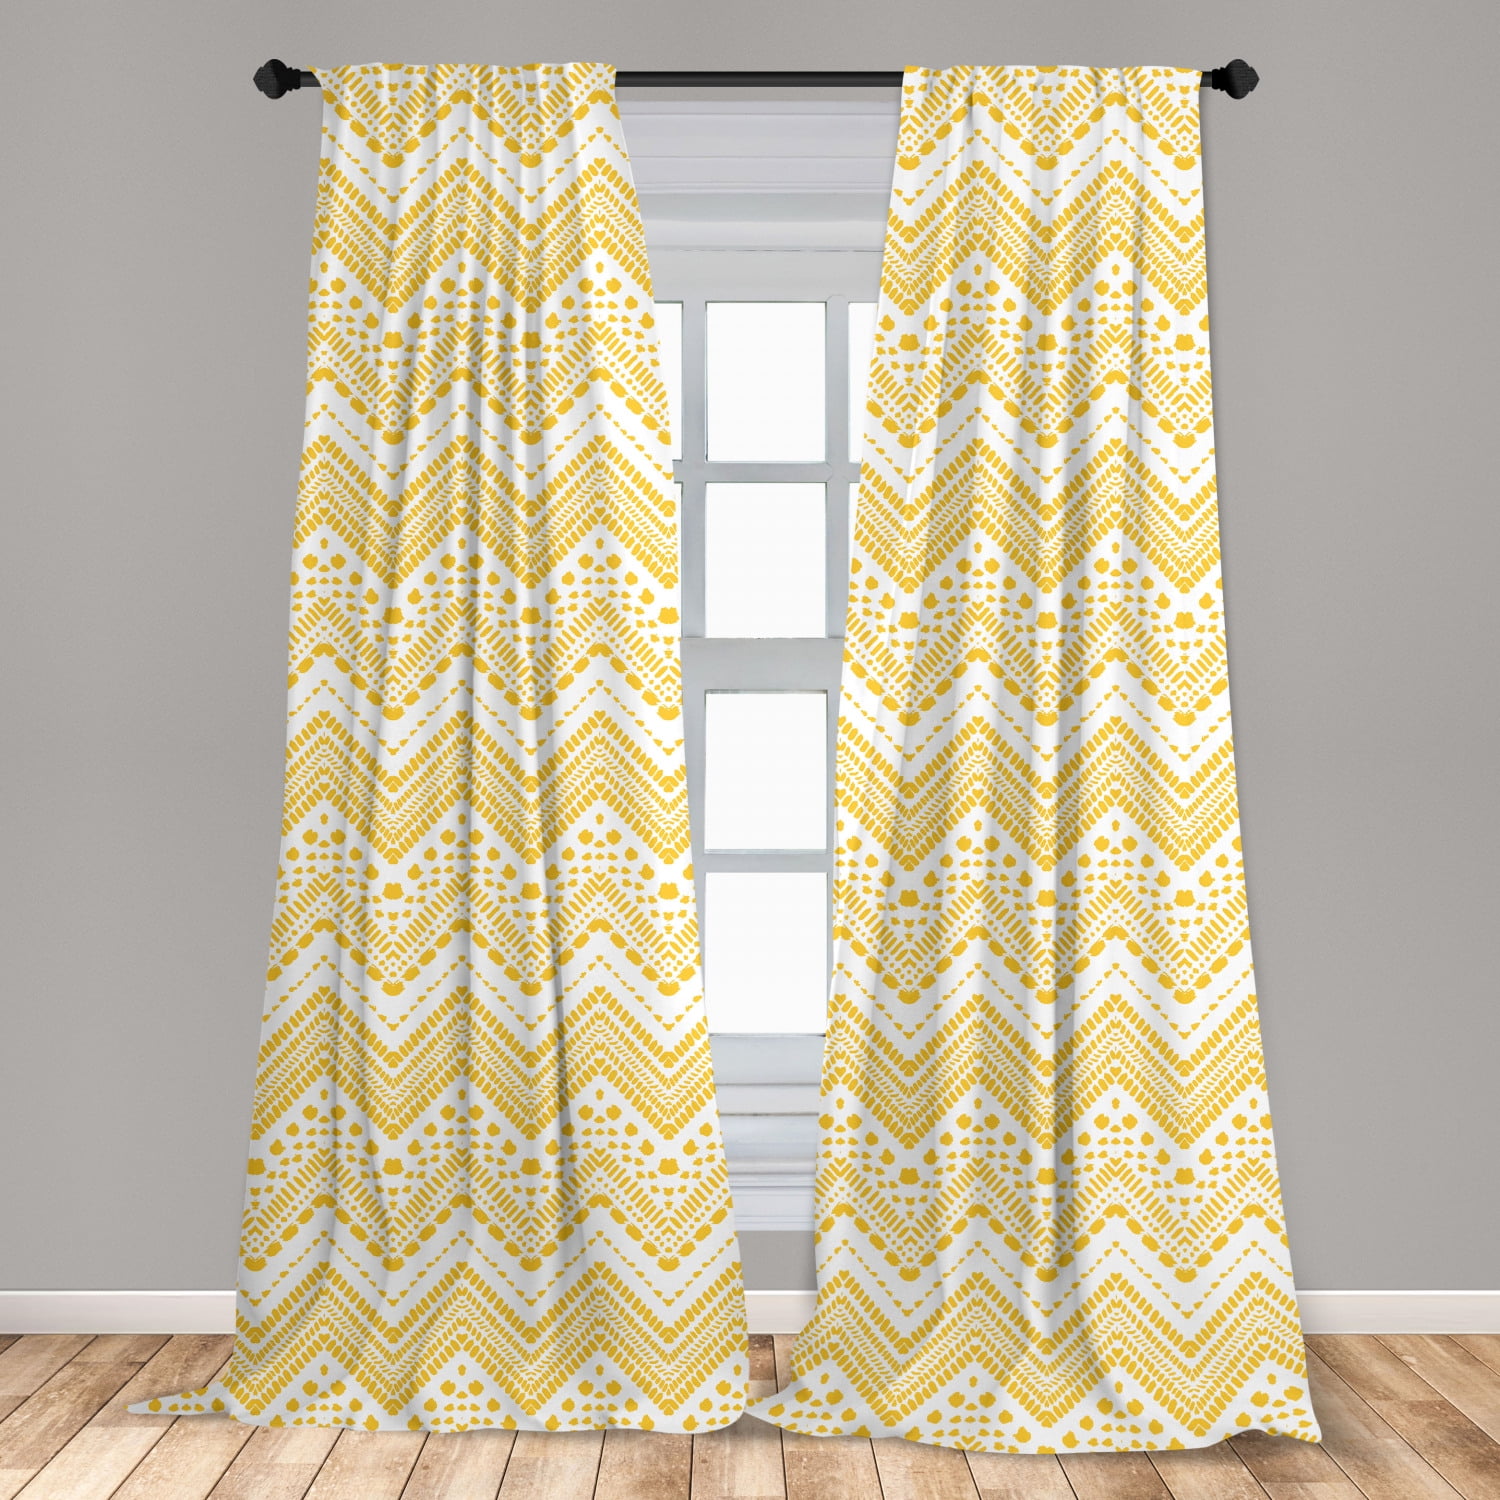 1PC CHEVRON DESIG FRENCH DOOR CURTAIN PANEL LINED SIZE 55"W X72"L NEW STYLE MEME 